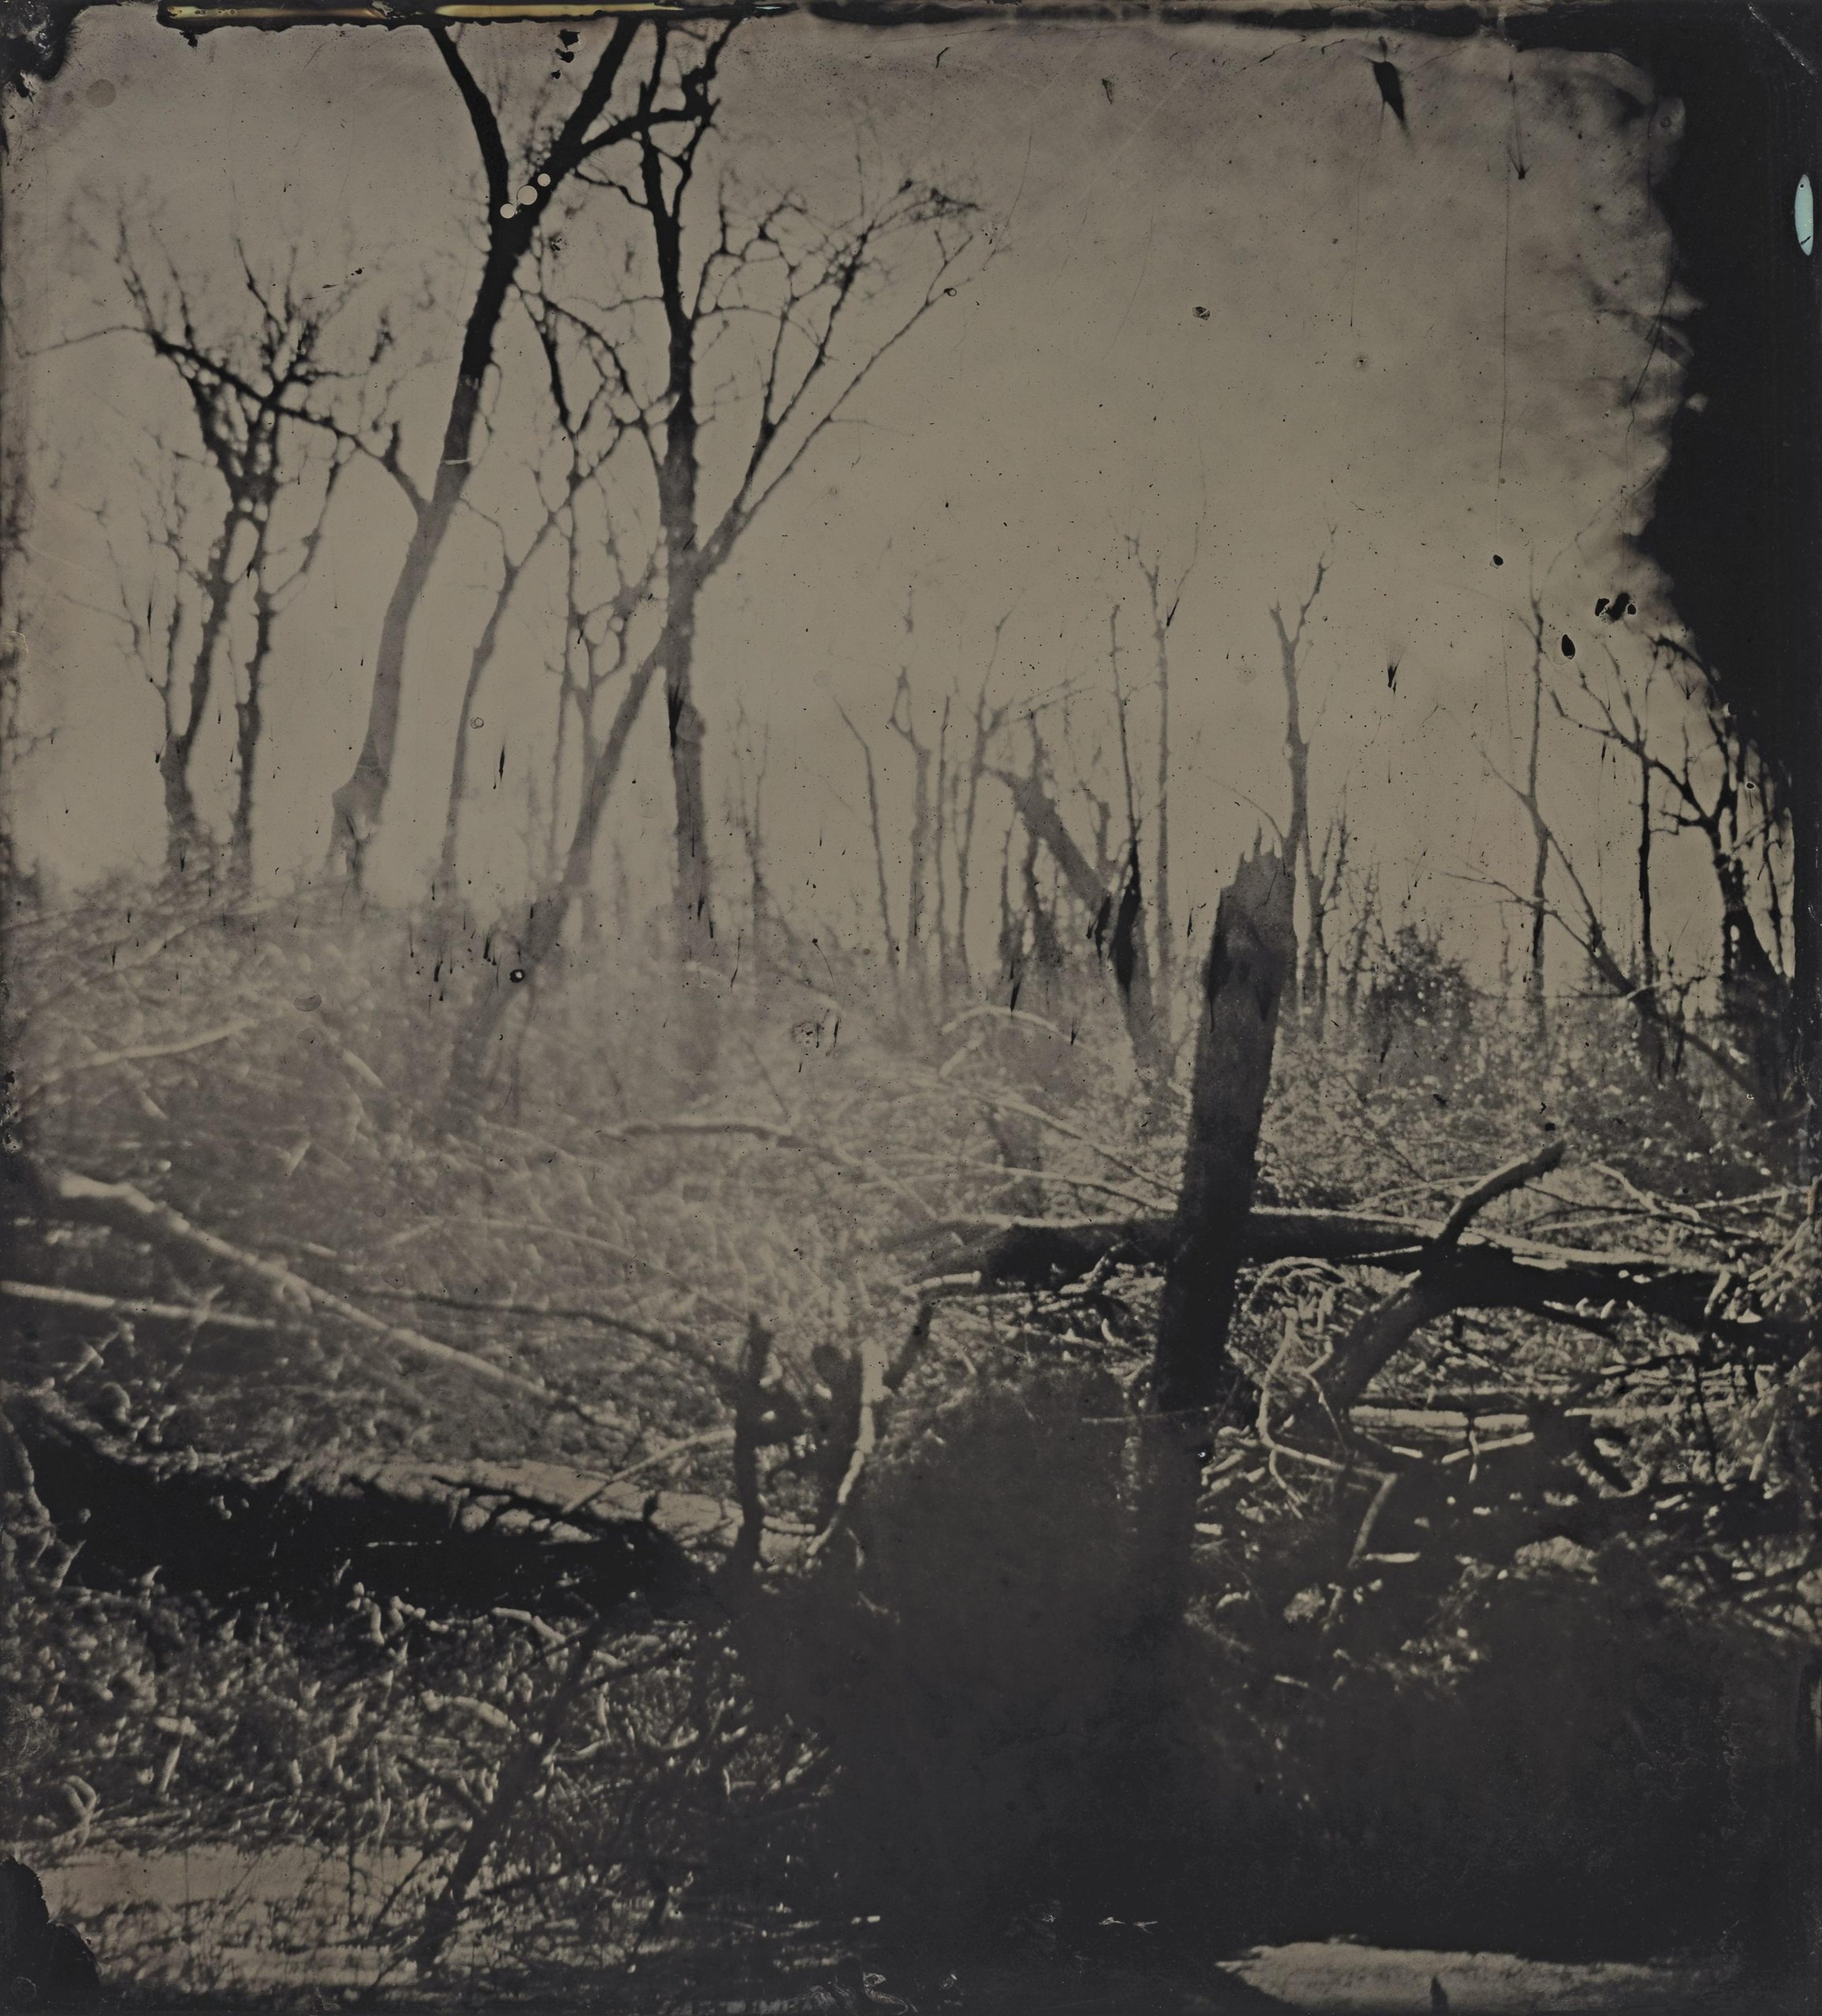 A sepia photograph of a desolate, bare forest with branches in the shape of a cross in the foreground